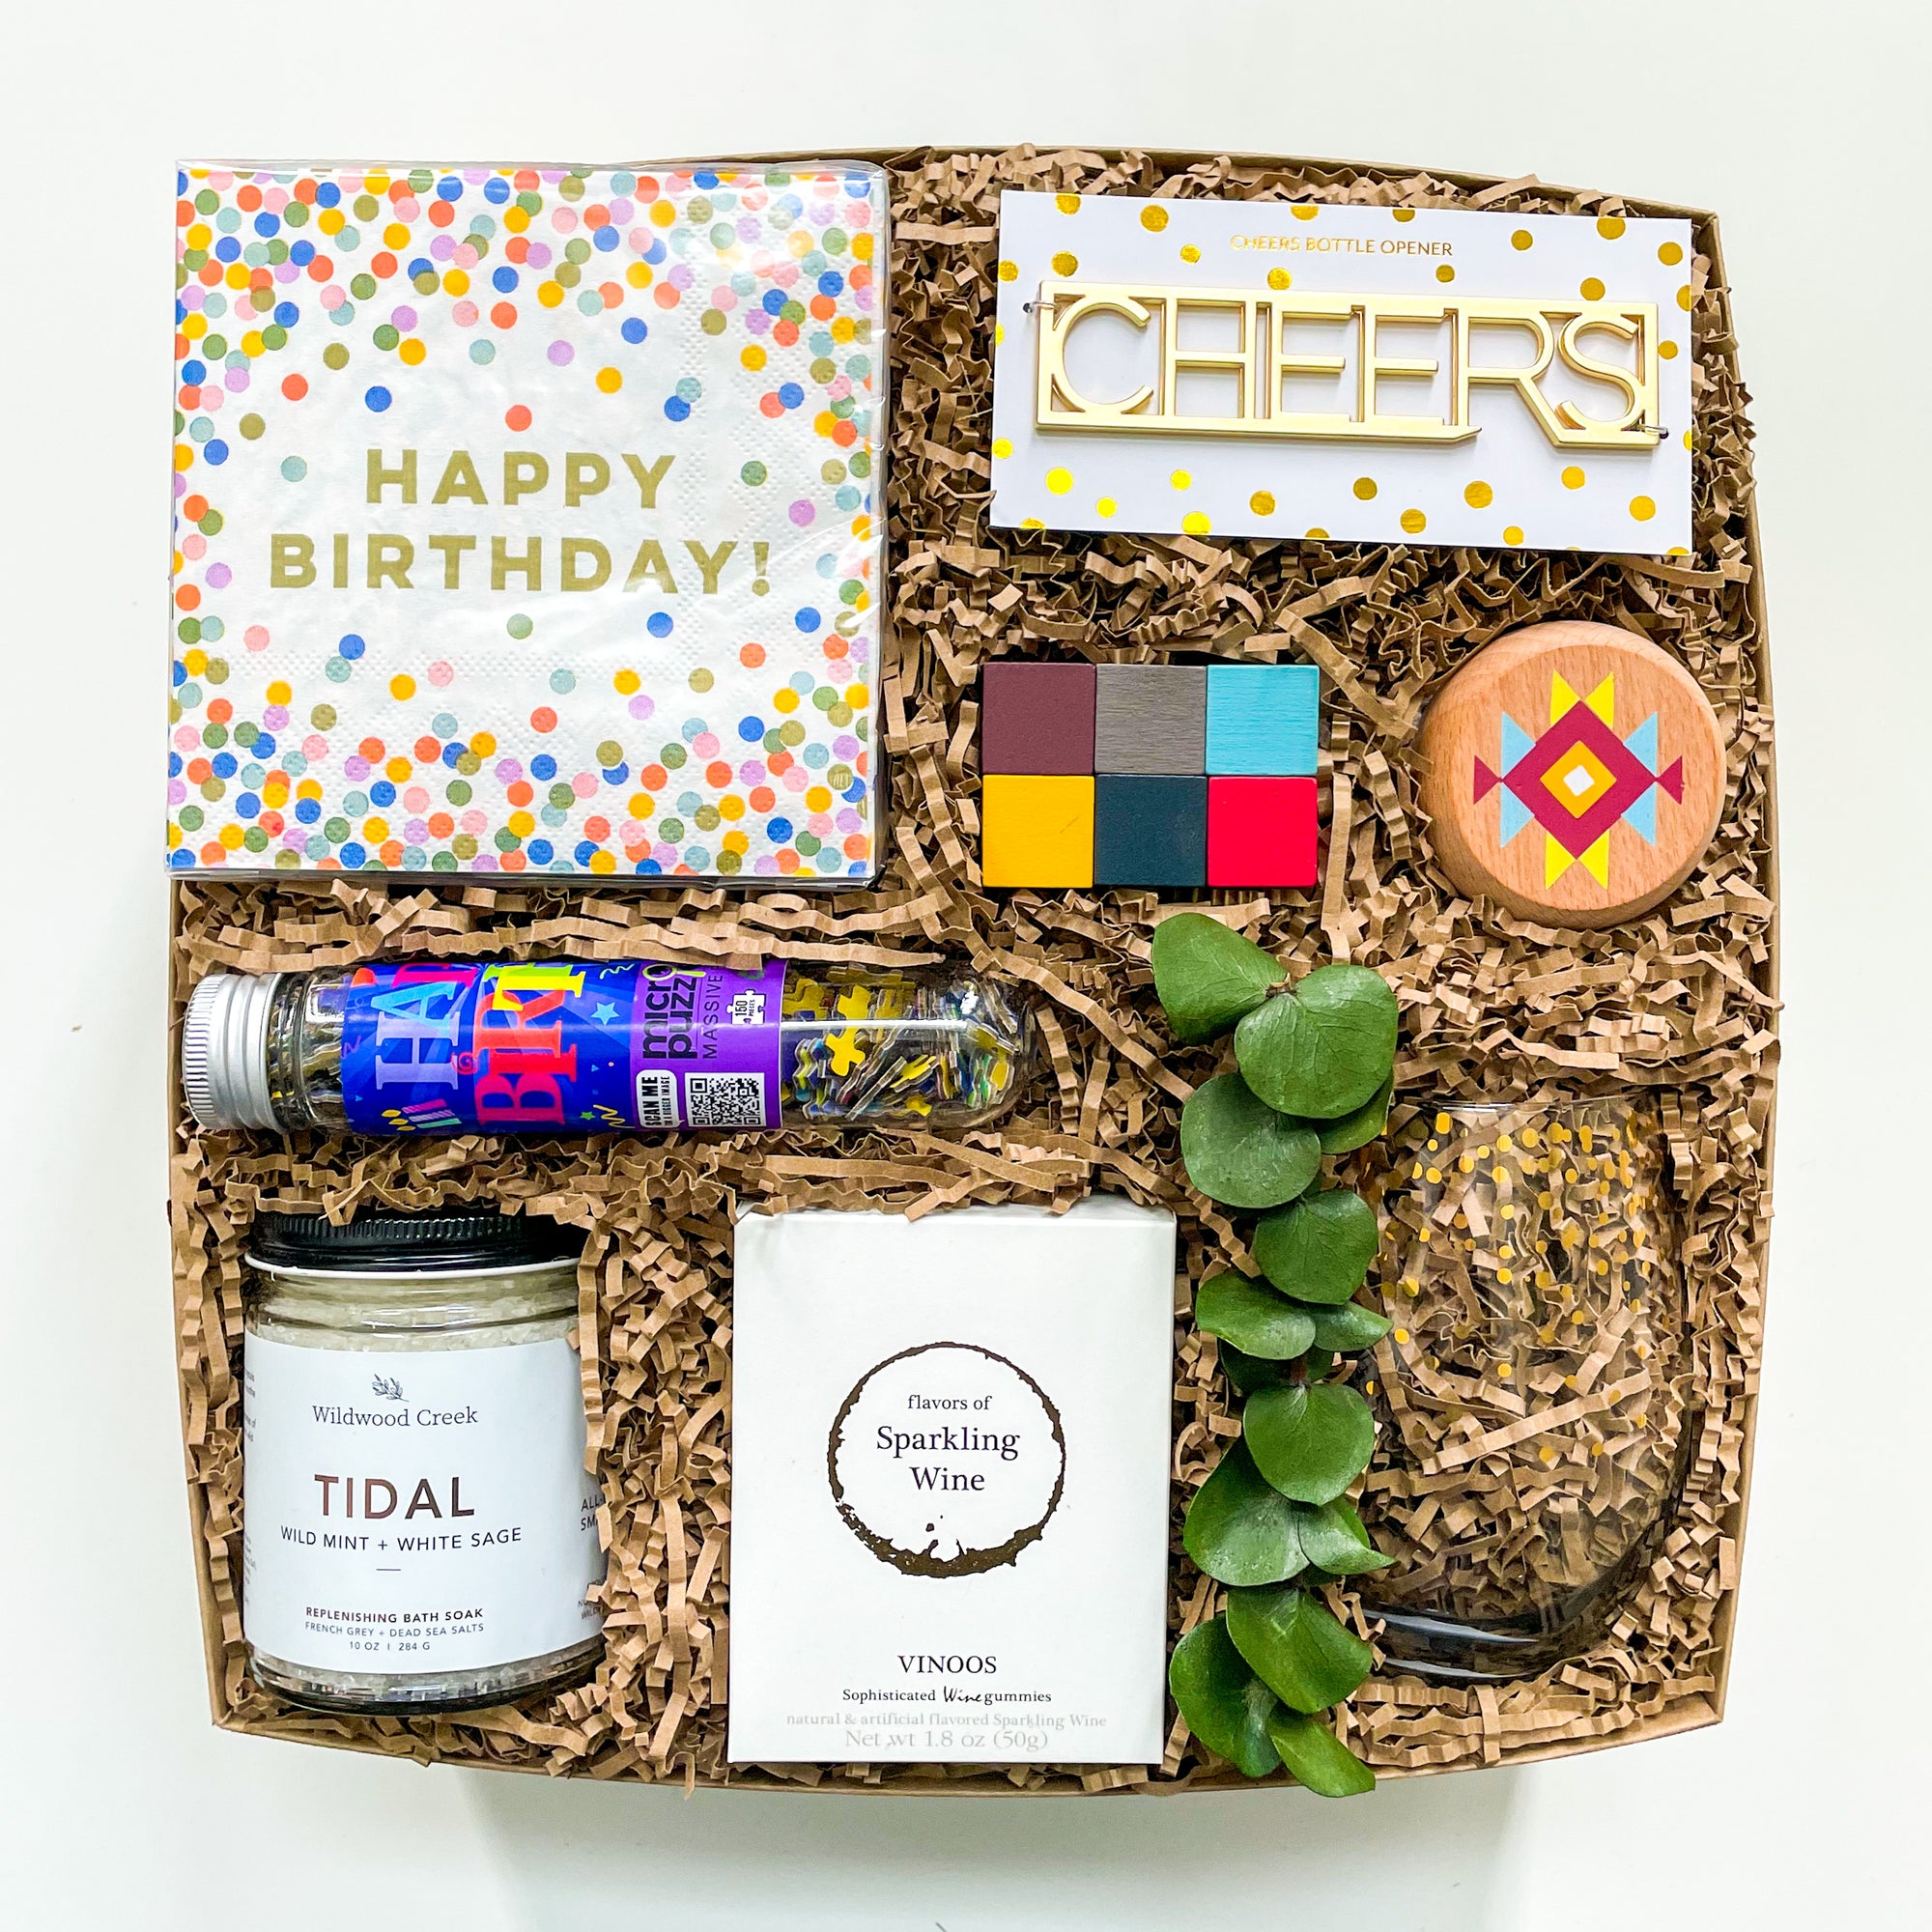 Make Their Birthday Extra Special with Our Thoughtful Gift Boxes